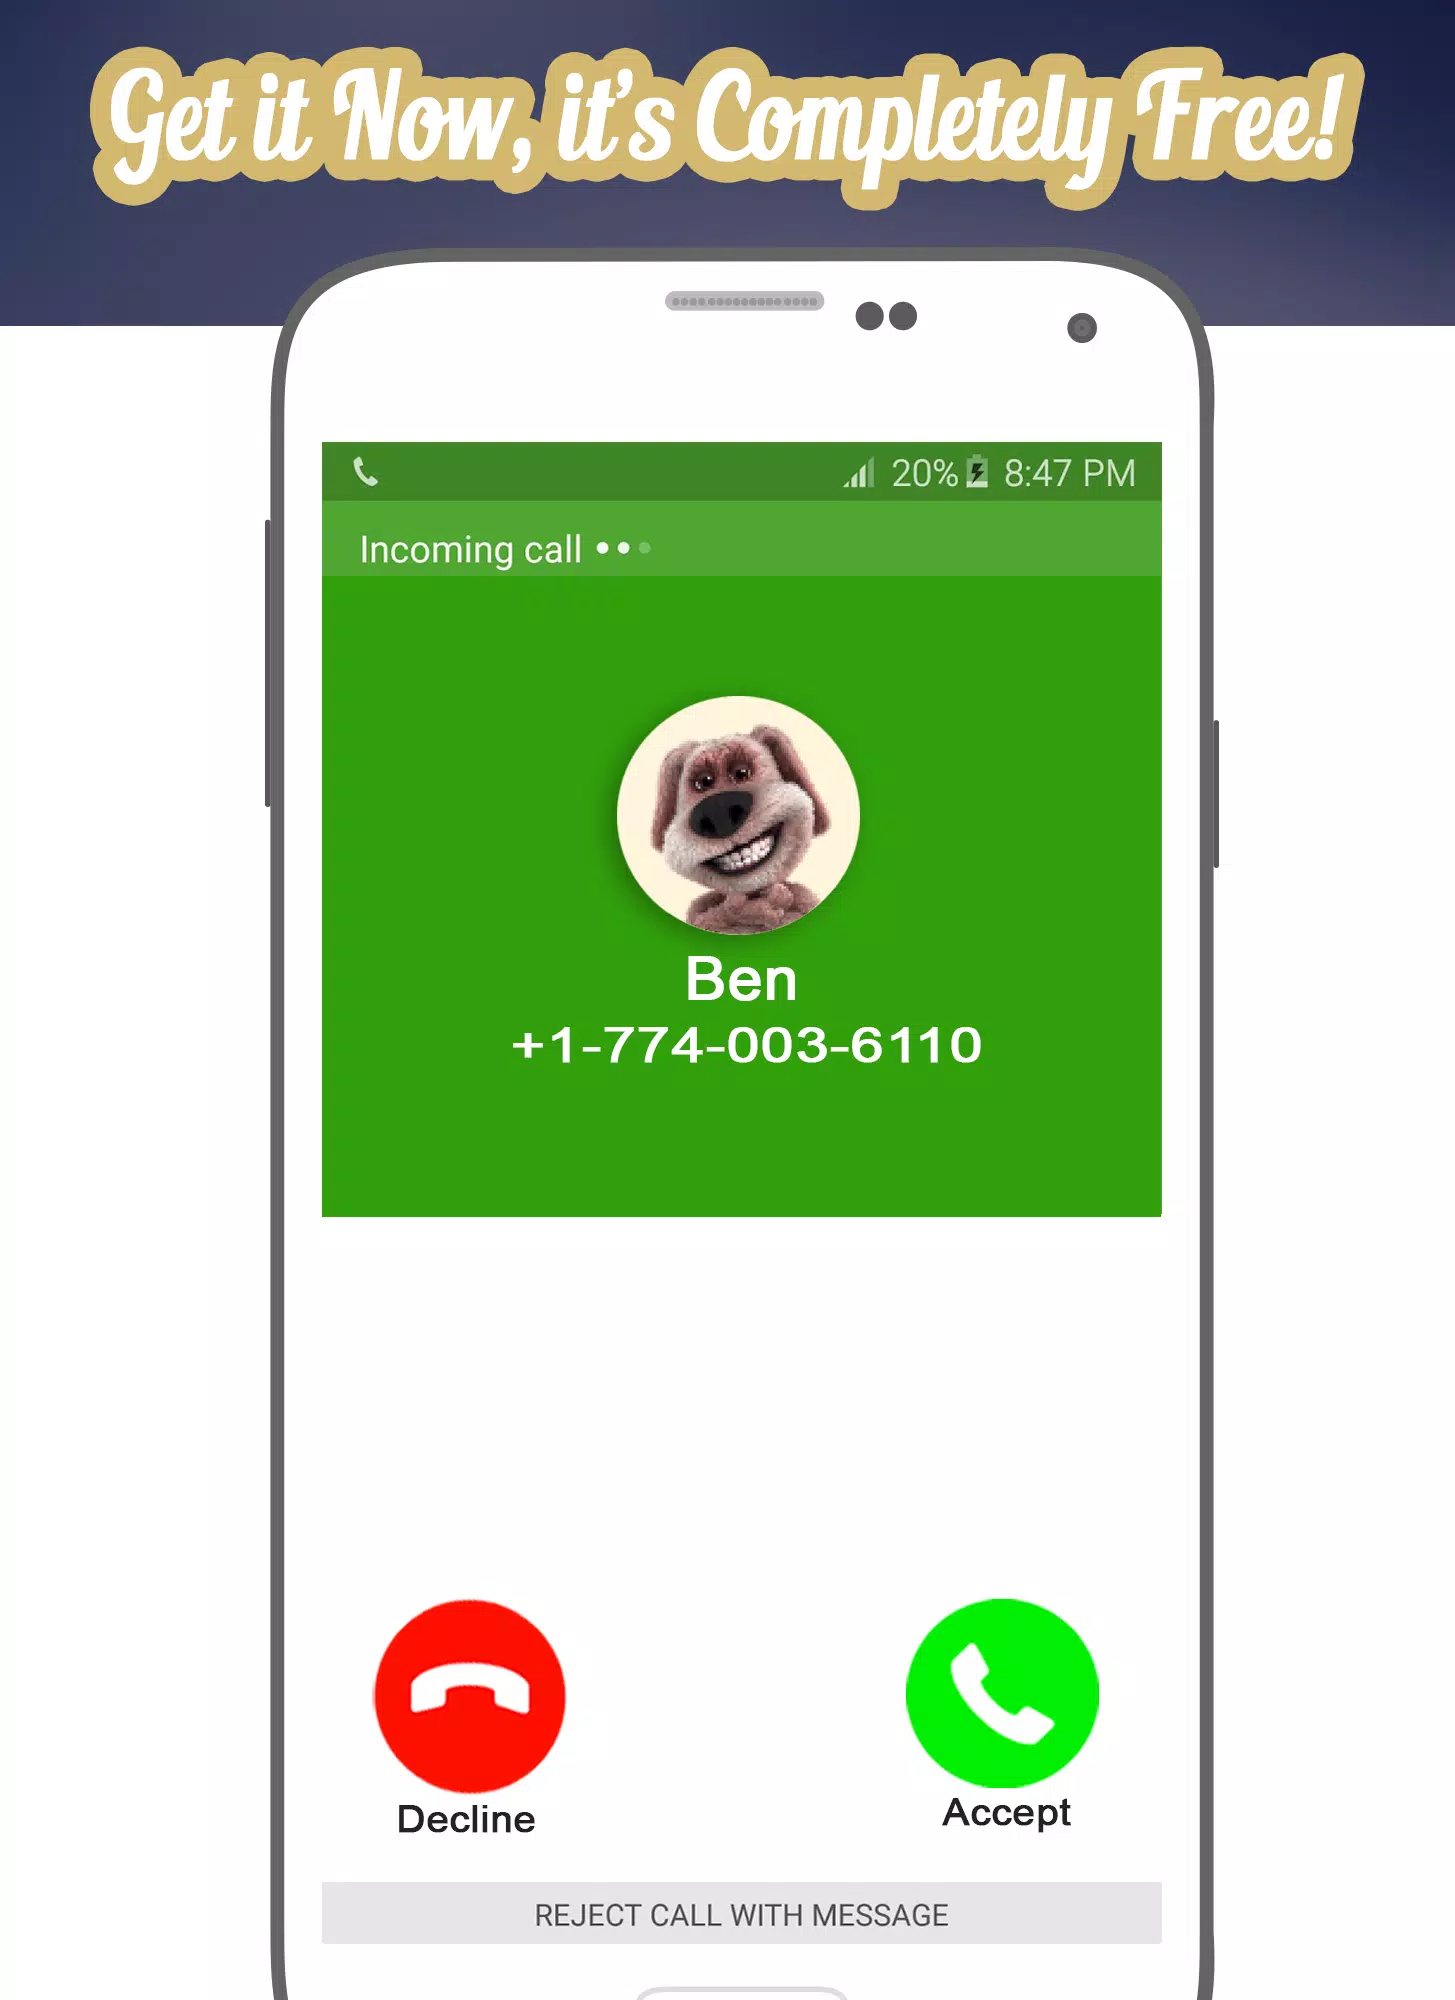 Talking Ben the Dog Free APK Download Free App For Android & iOS